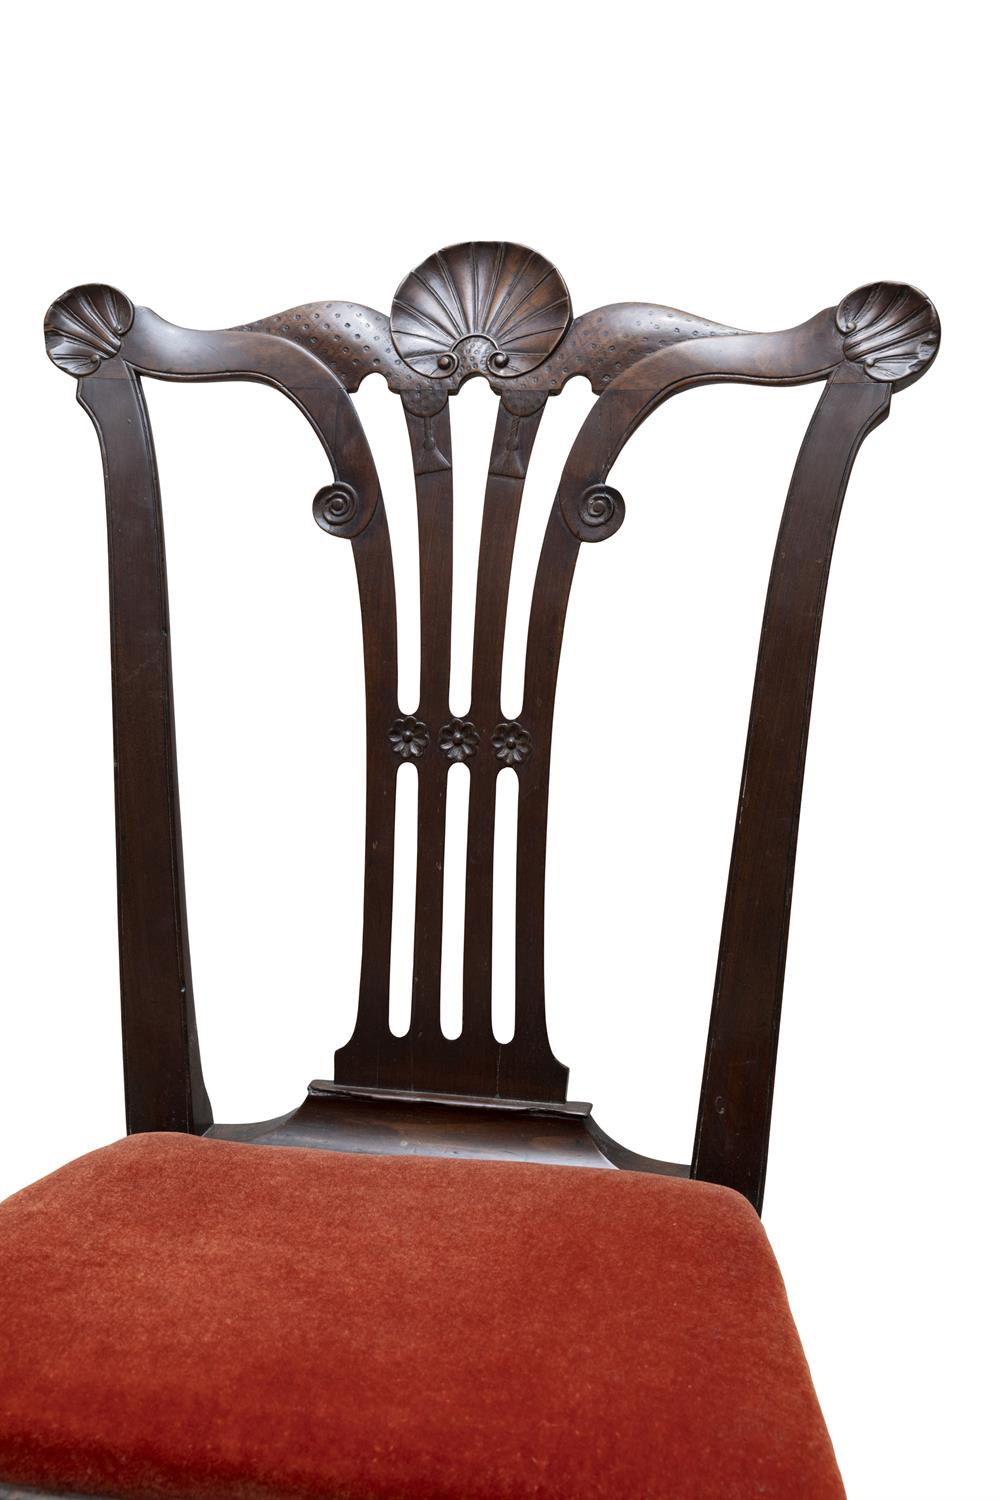 A PAIR OF IRISH MAHOGANY CHAIRS, C.1750, the waved crest rails accentuated with shell corners, - Image 5 of 5